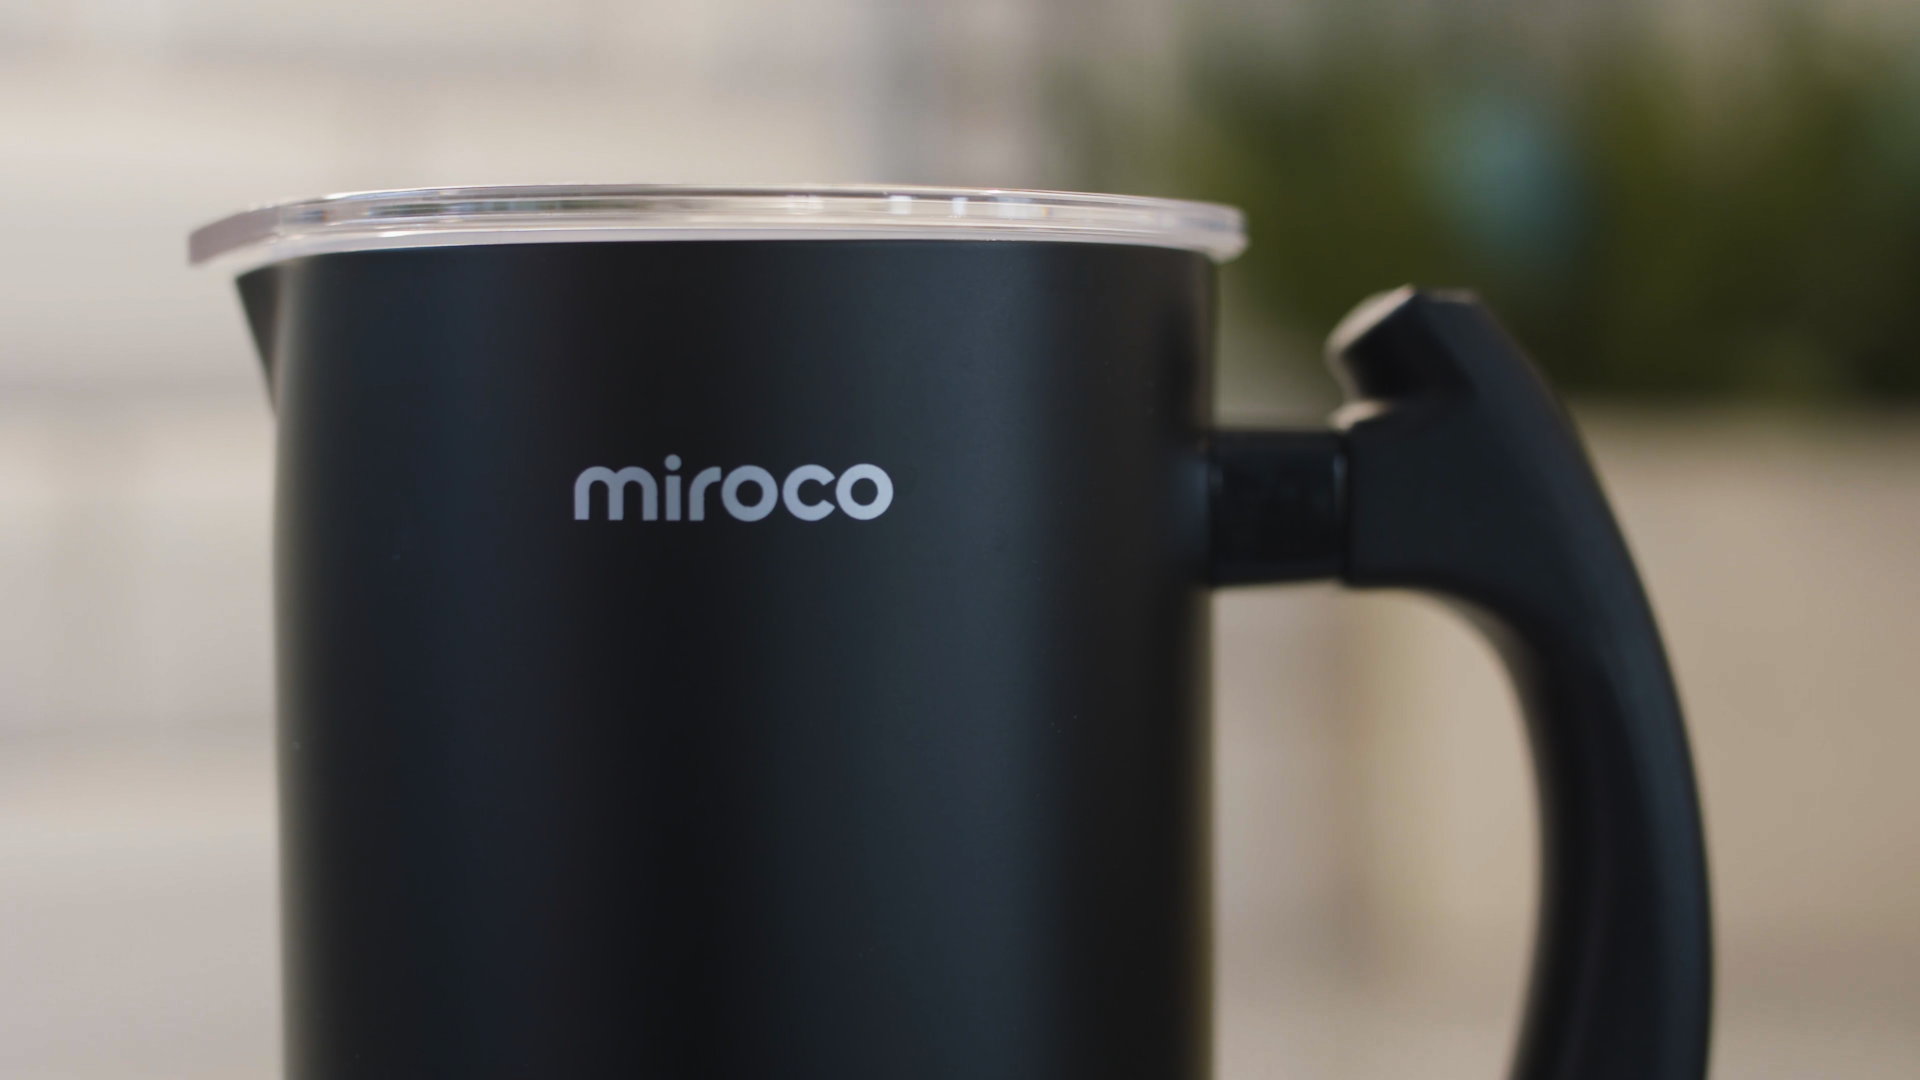 Make Your Own Latte from Home with the Miroco Frother